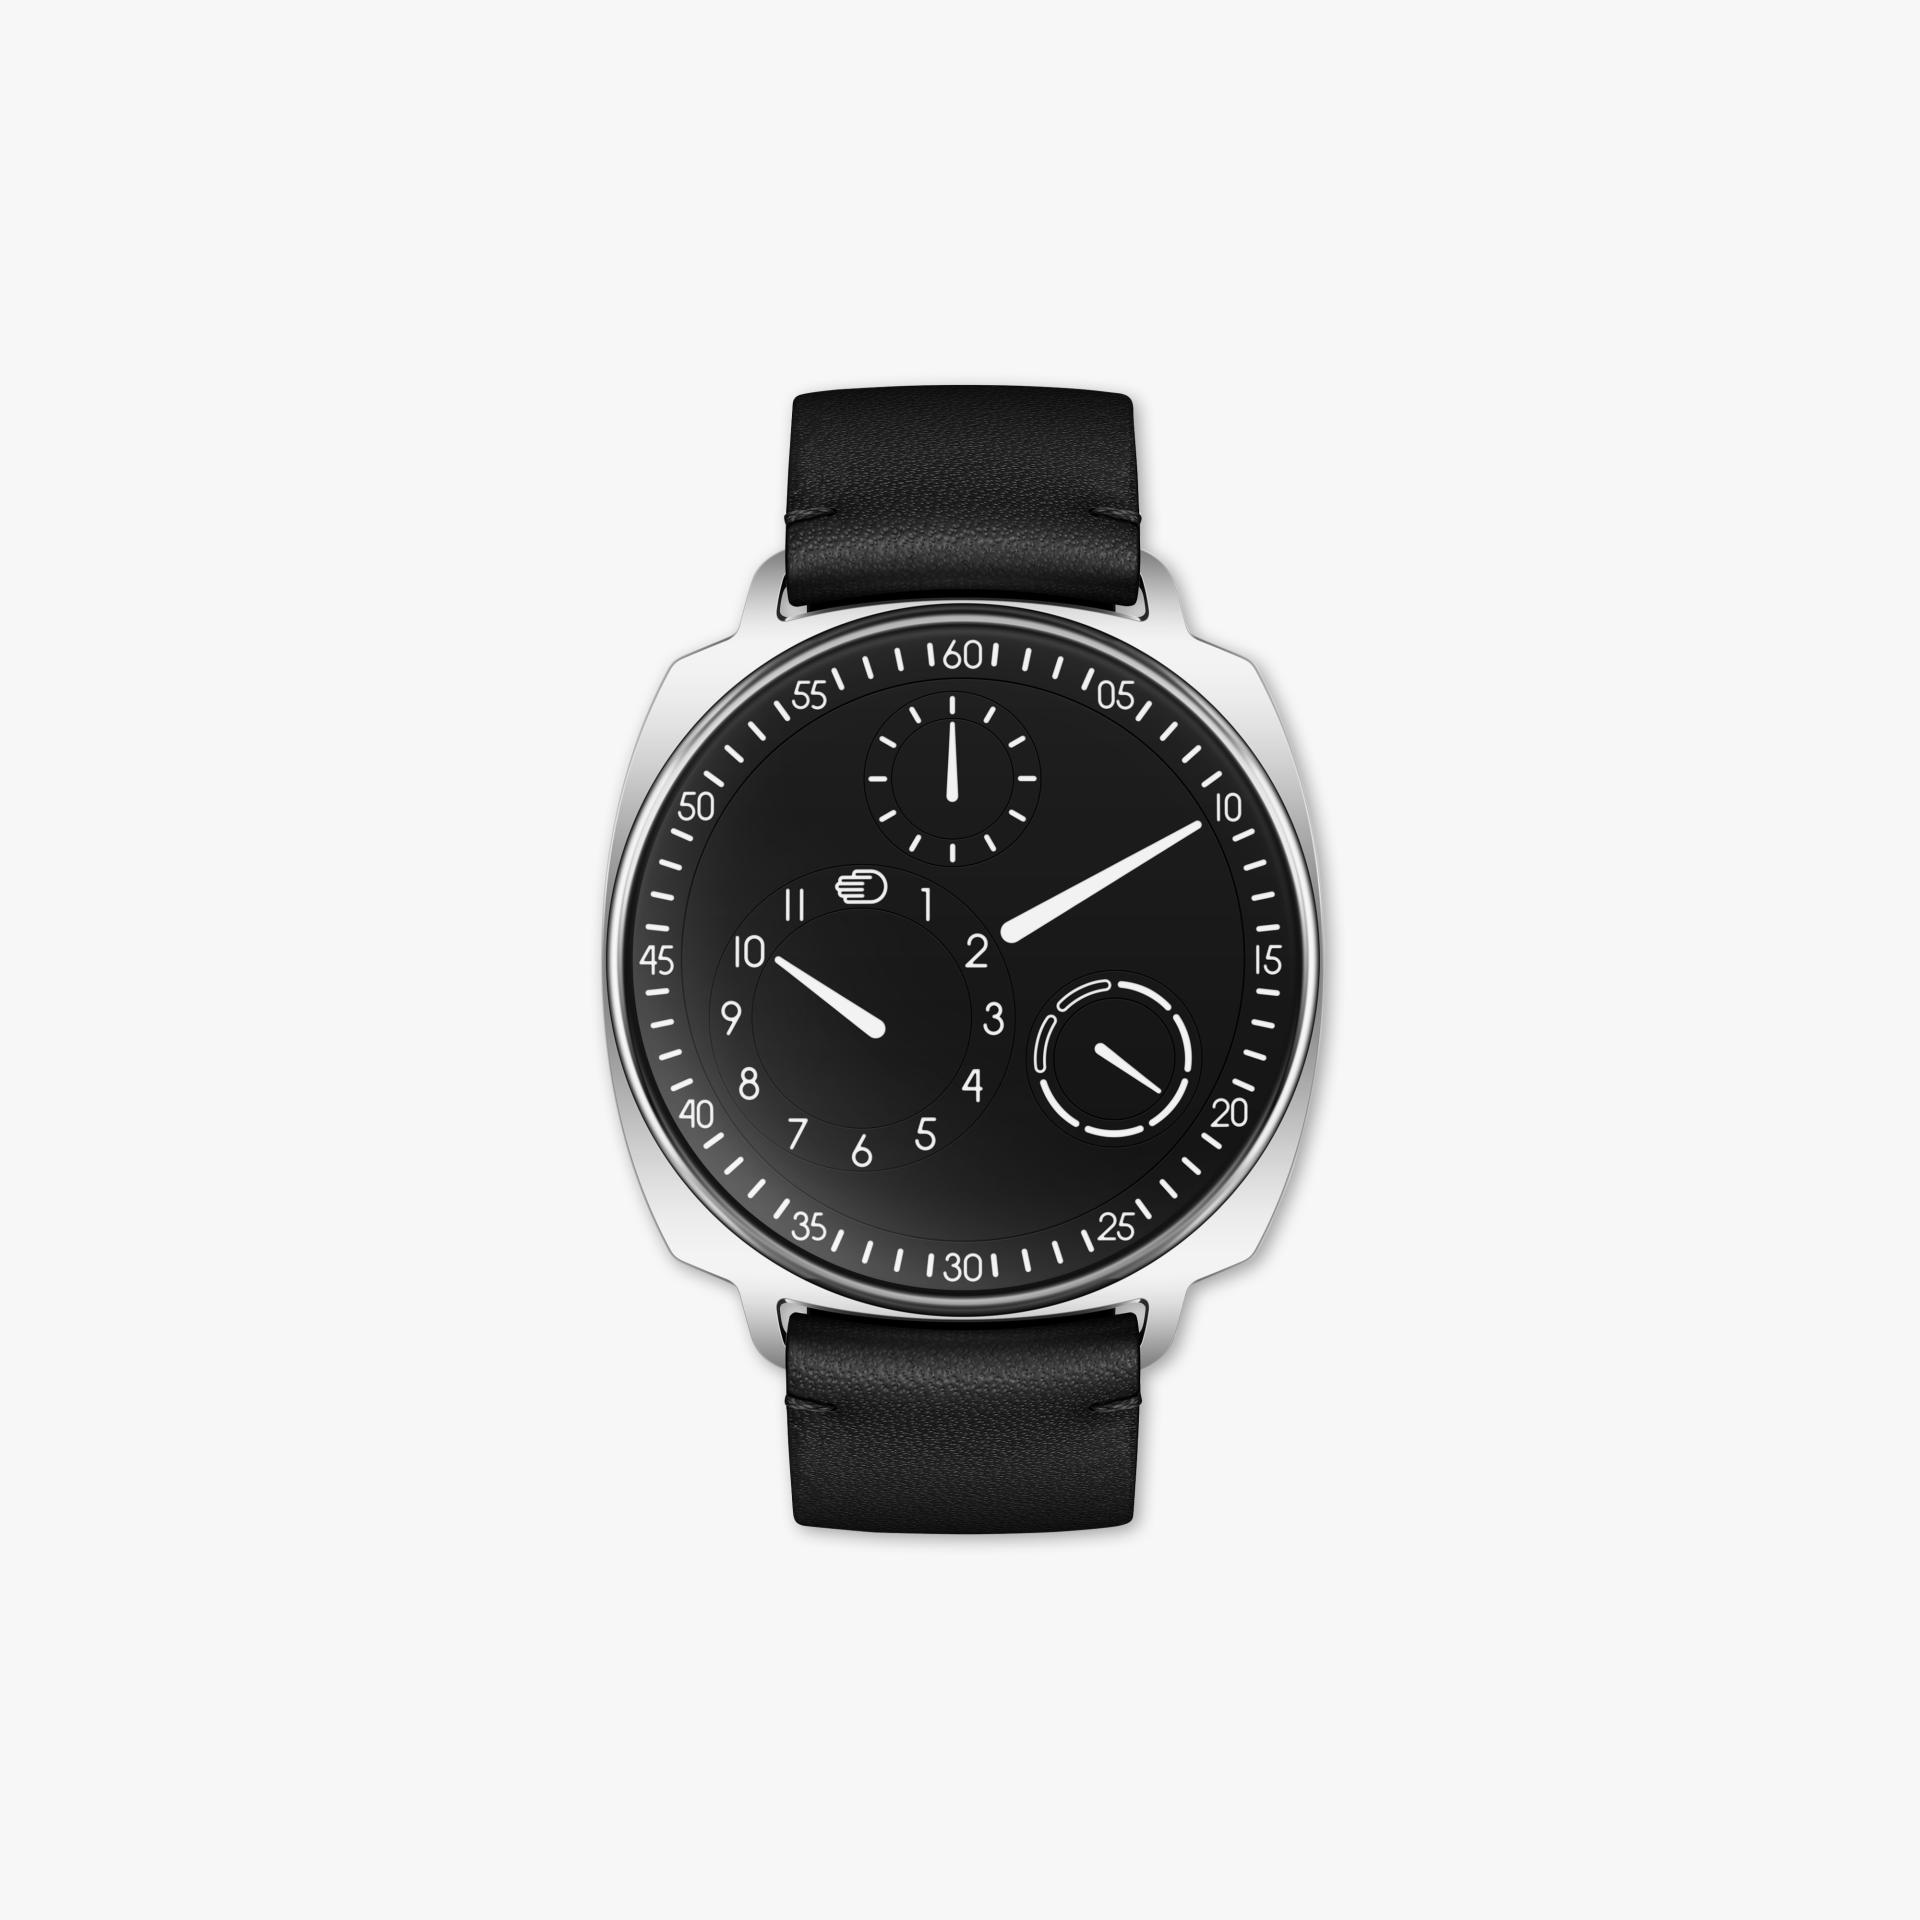 Type 1² Squared Black made by Ressence